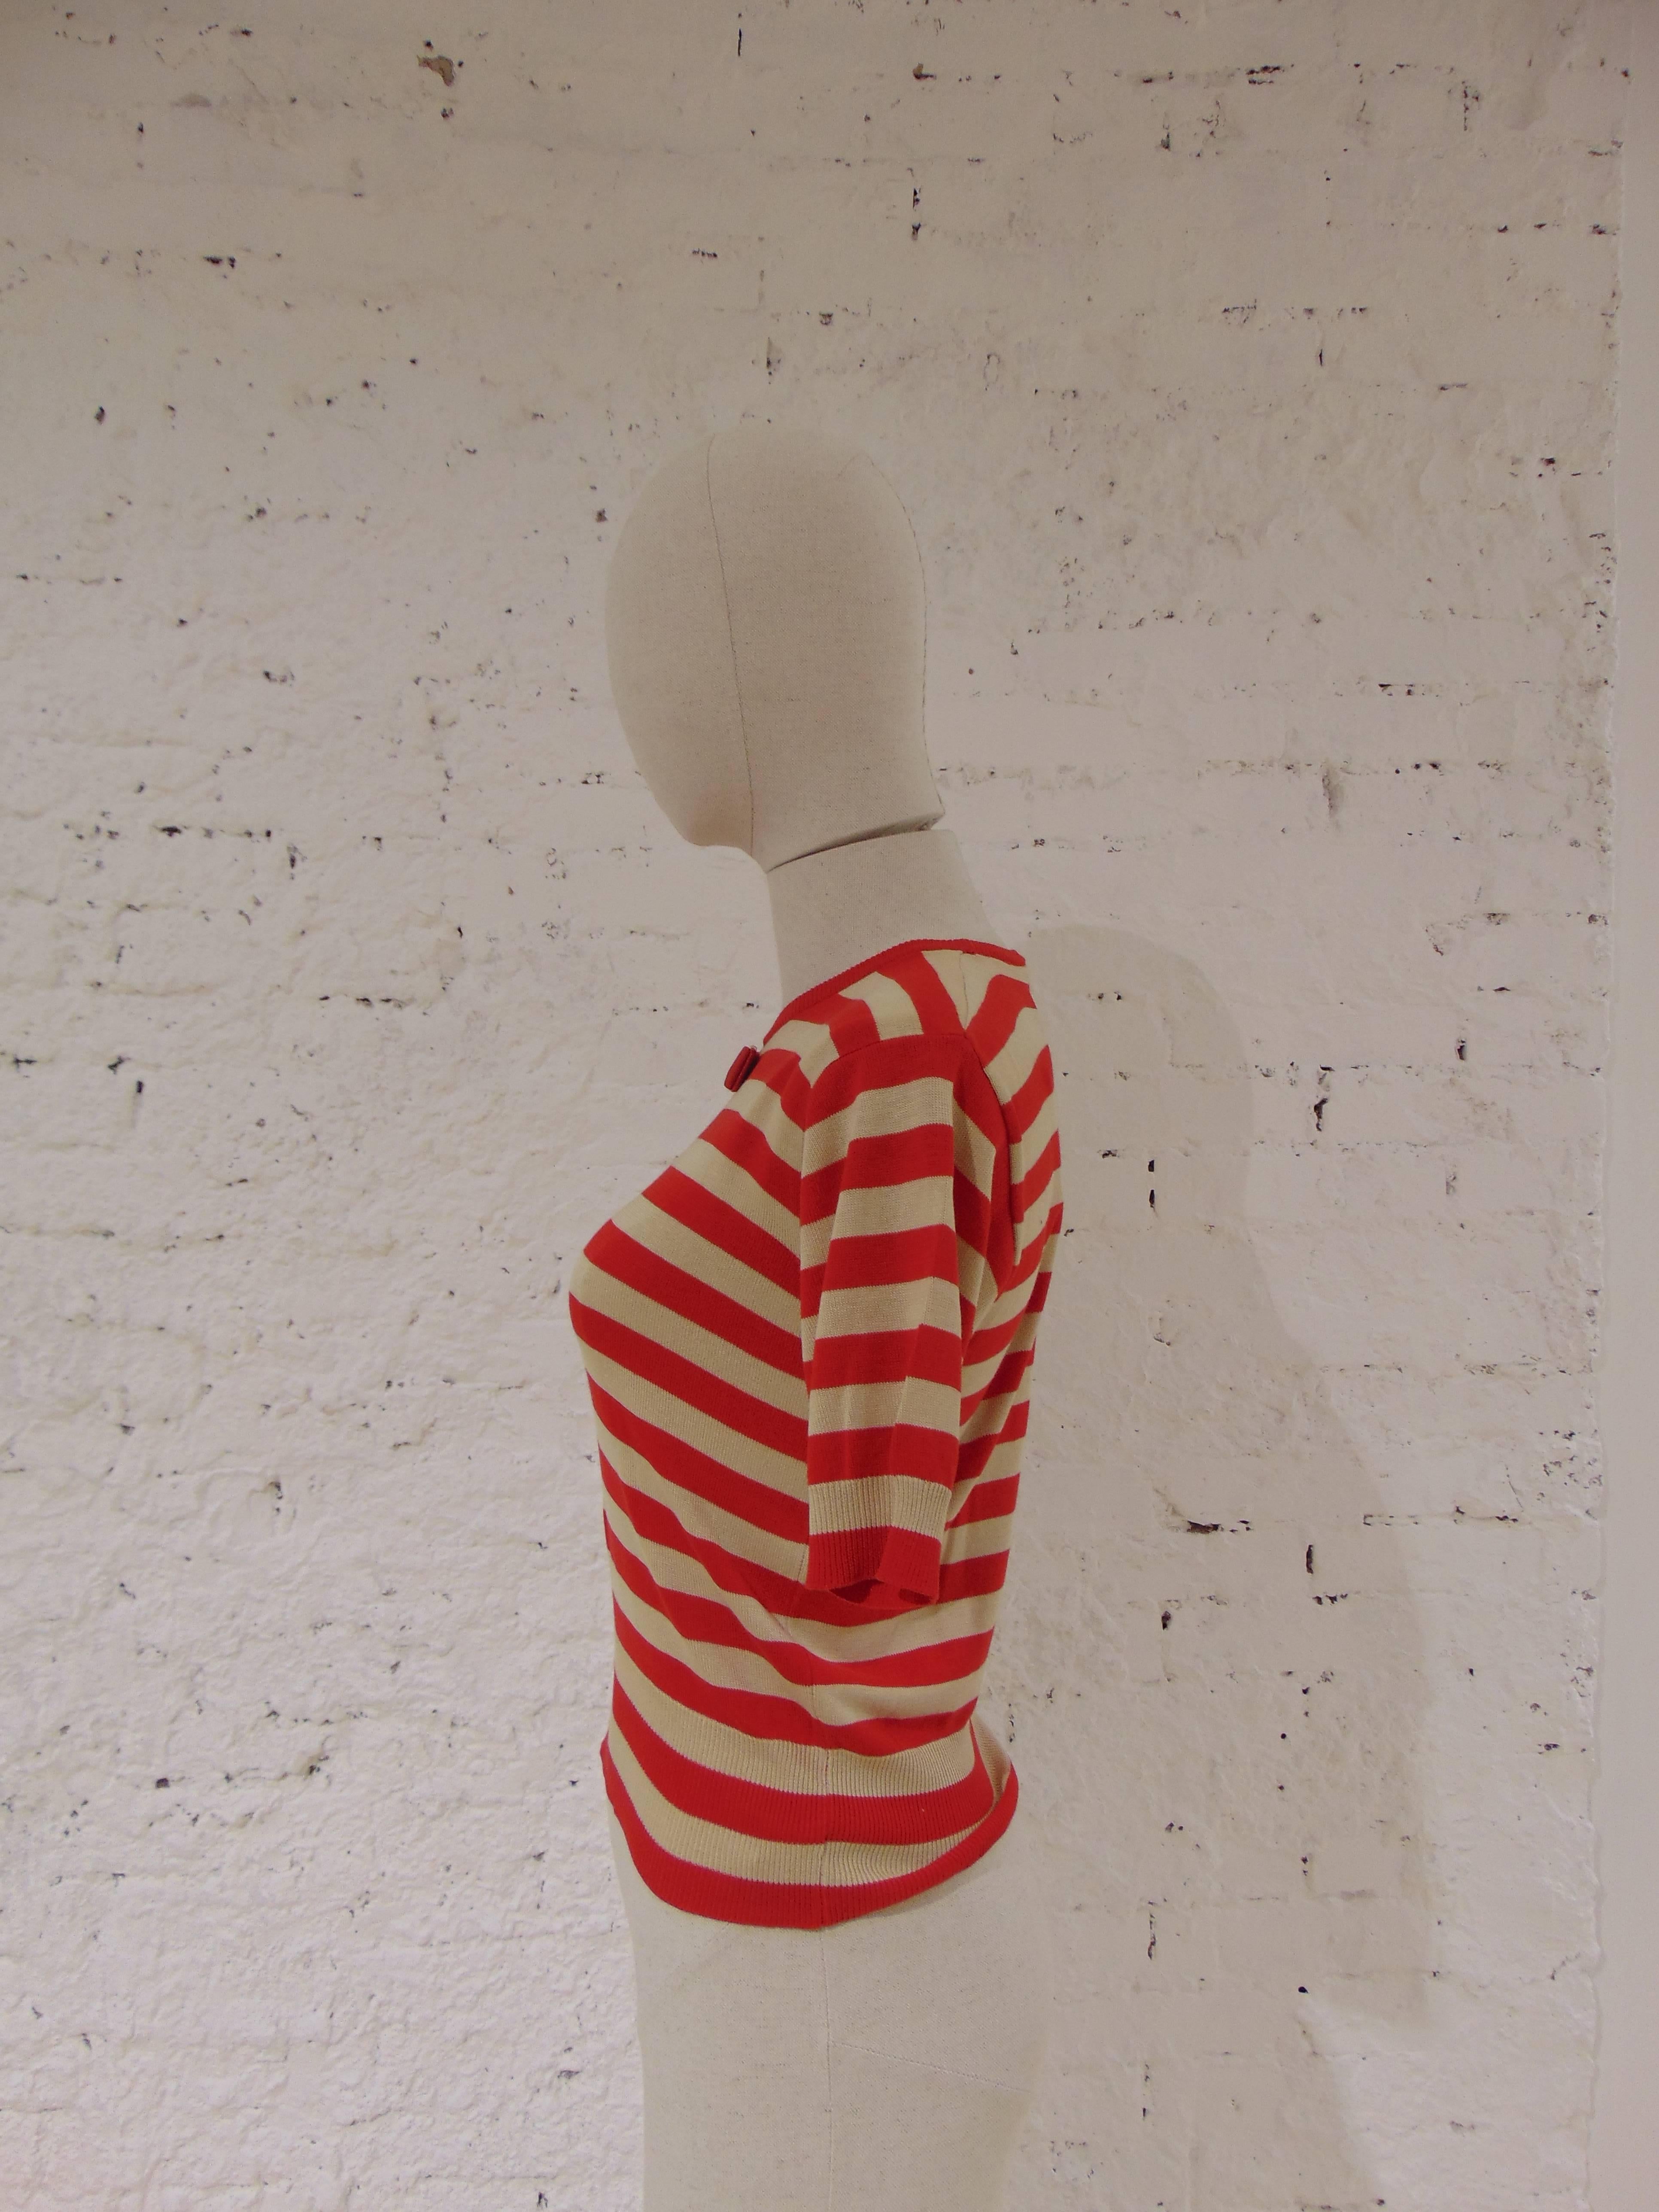 Salvatore Ferragamo red cream stripes short sleeves shirt
composition: Cotton
totally made in italy in size S